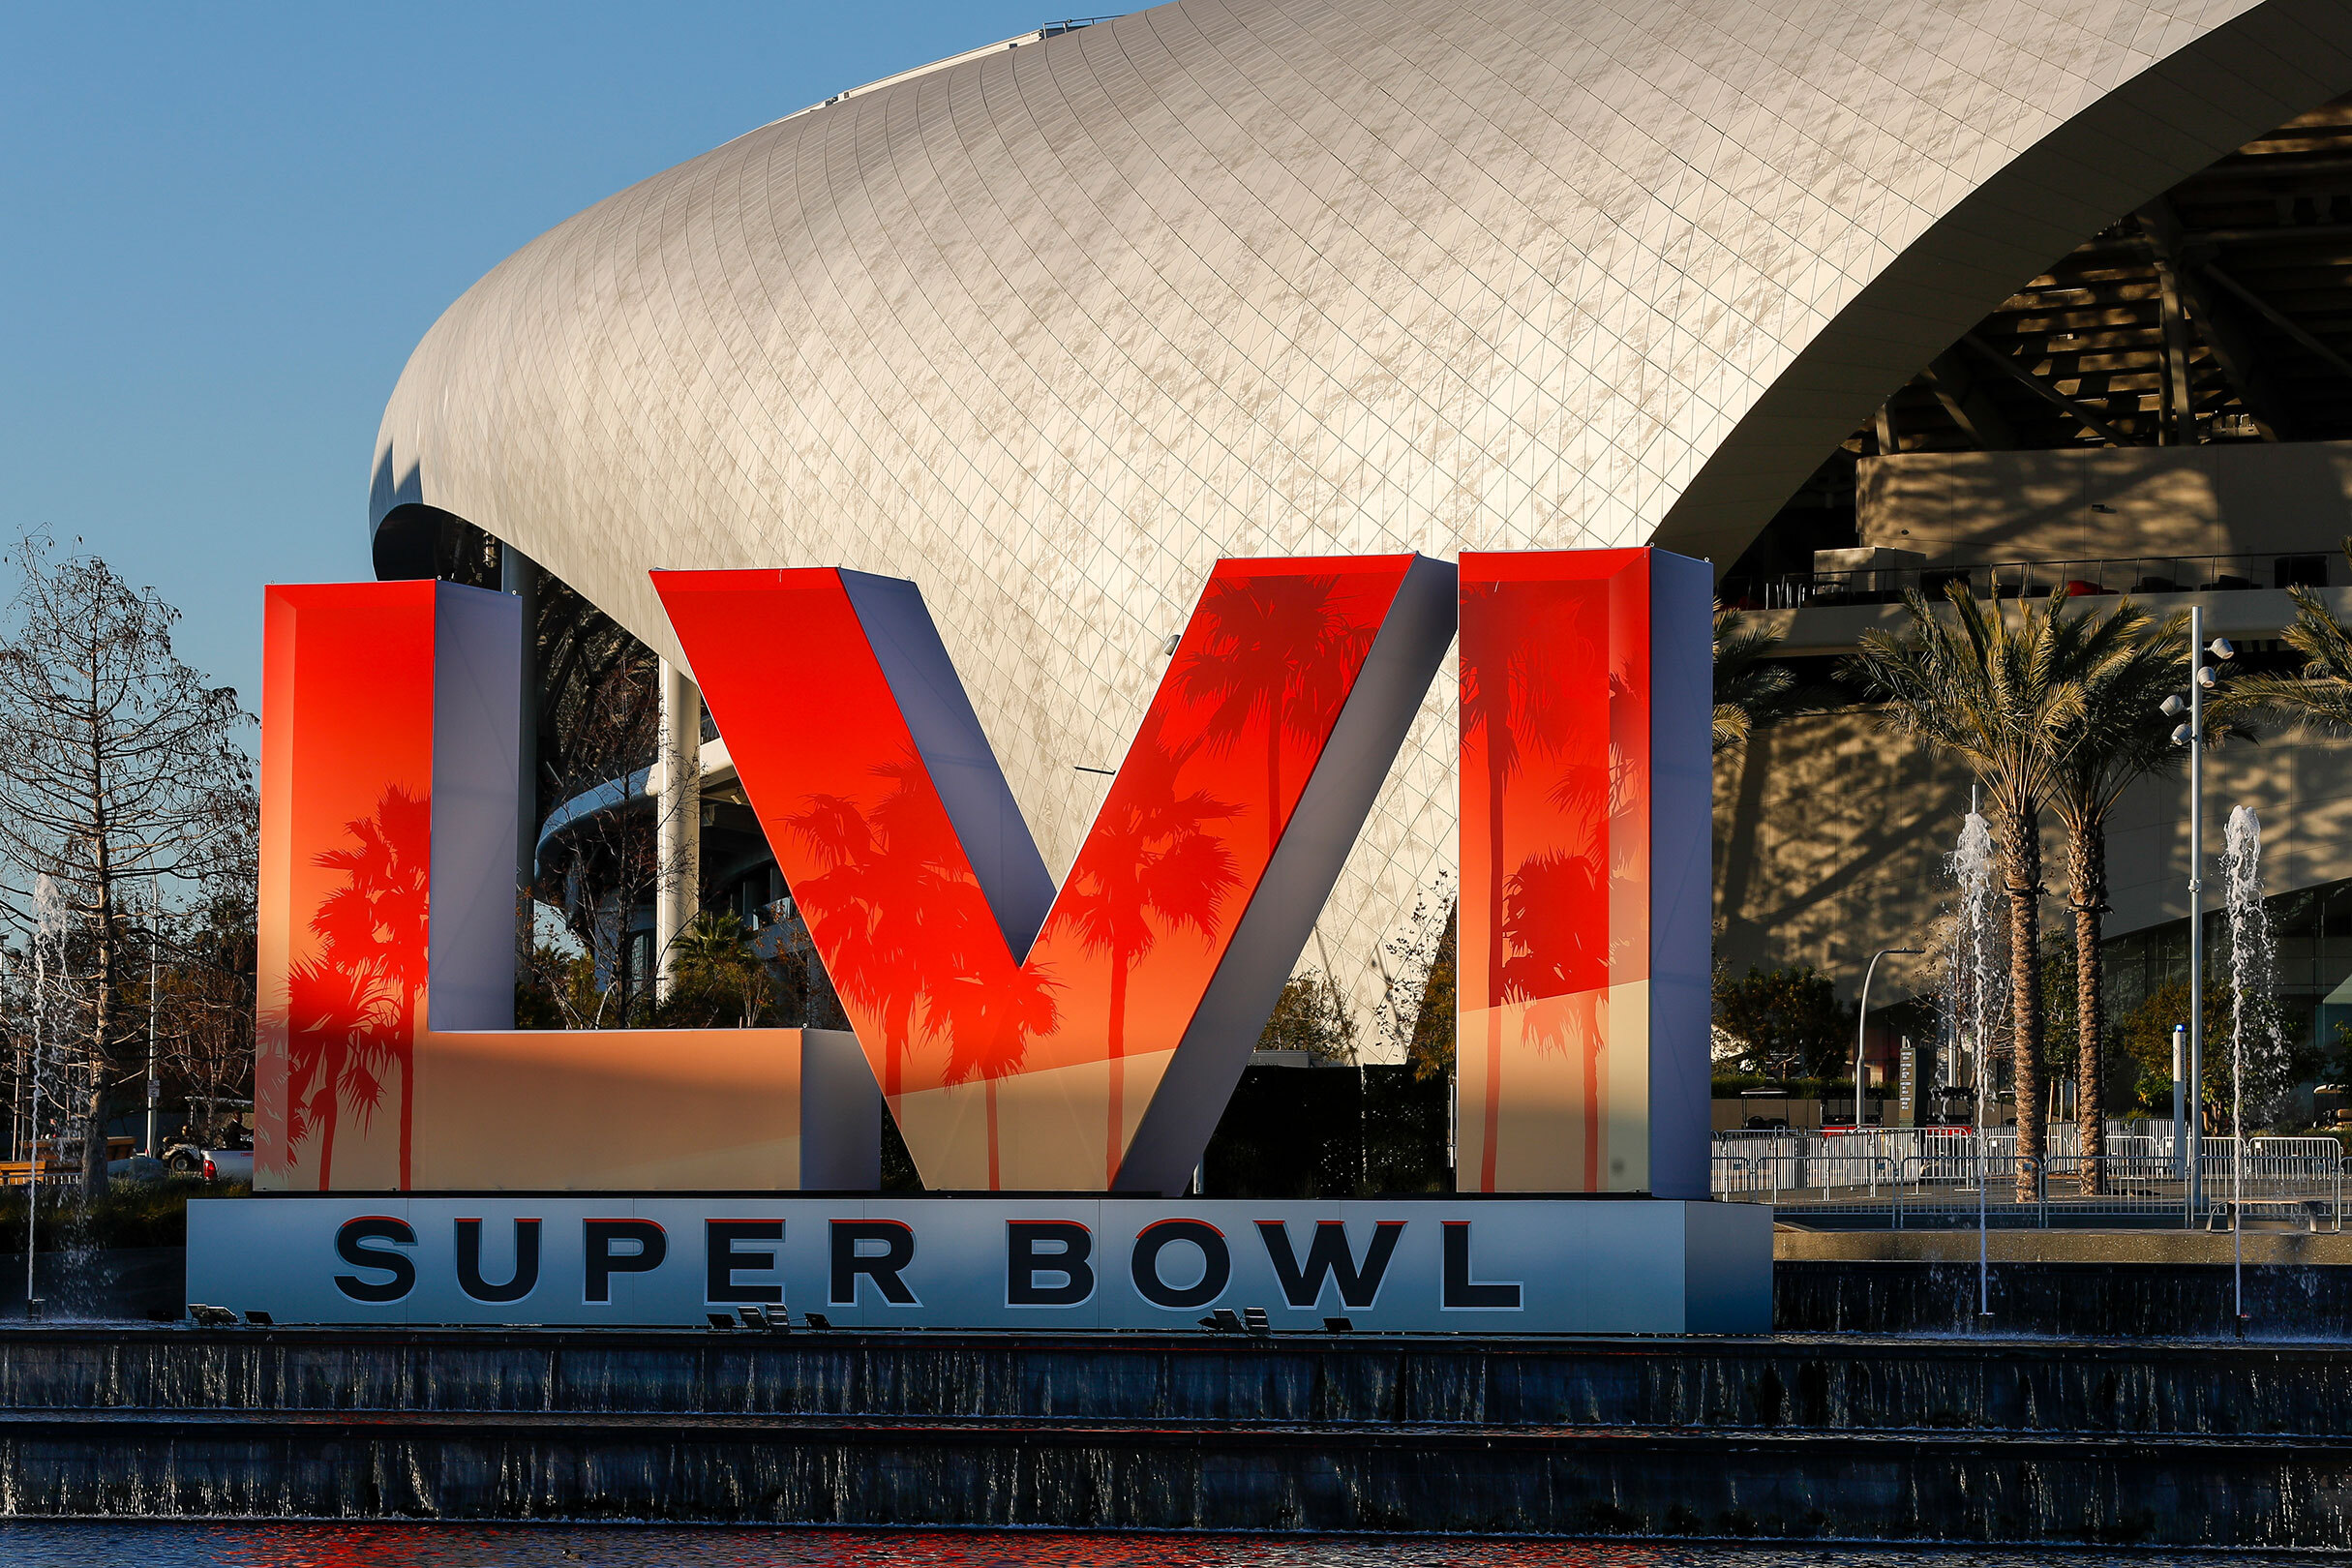 can you watch the superbowl on nbc app